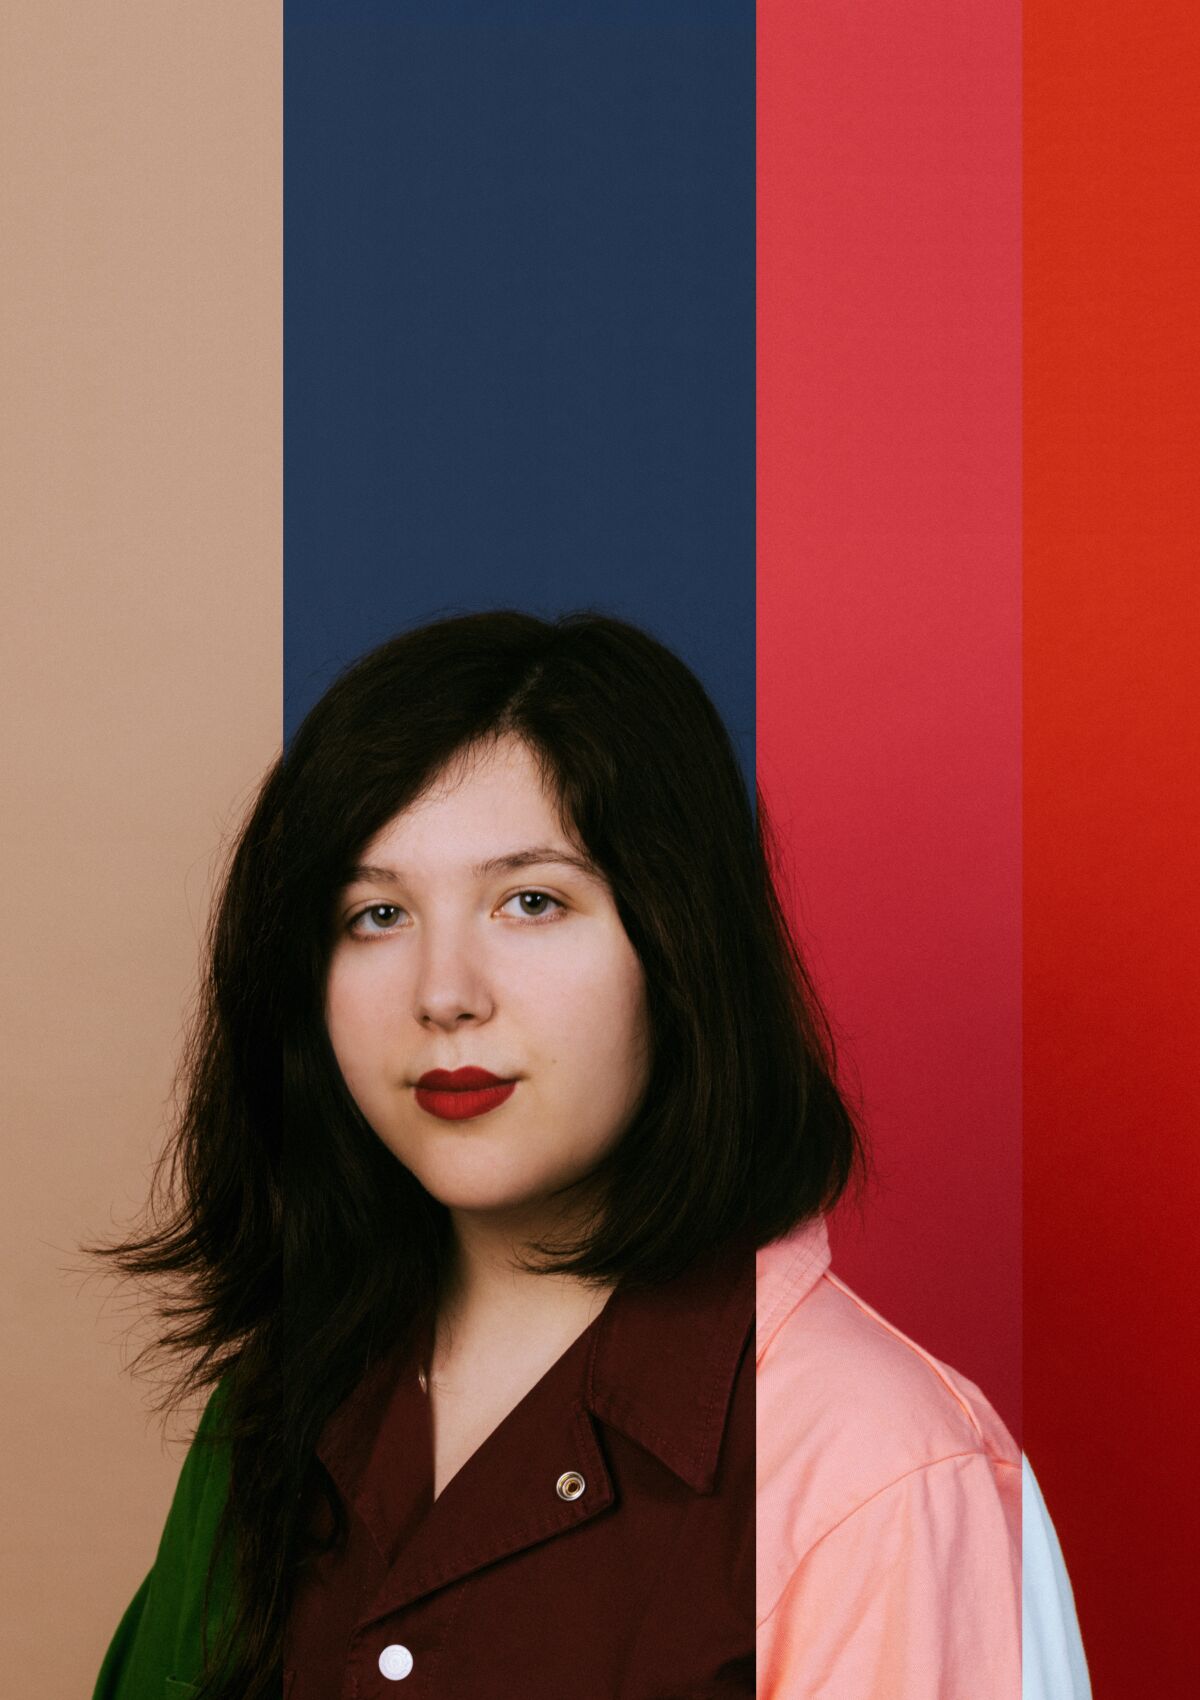 Lucy Dacus, one of the biggest indie-rock artists of 2018, this year released her versions of songs by Edith Piaf, Bruce Springsteen and Phil Collins.